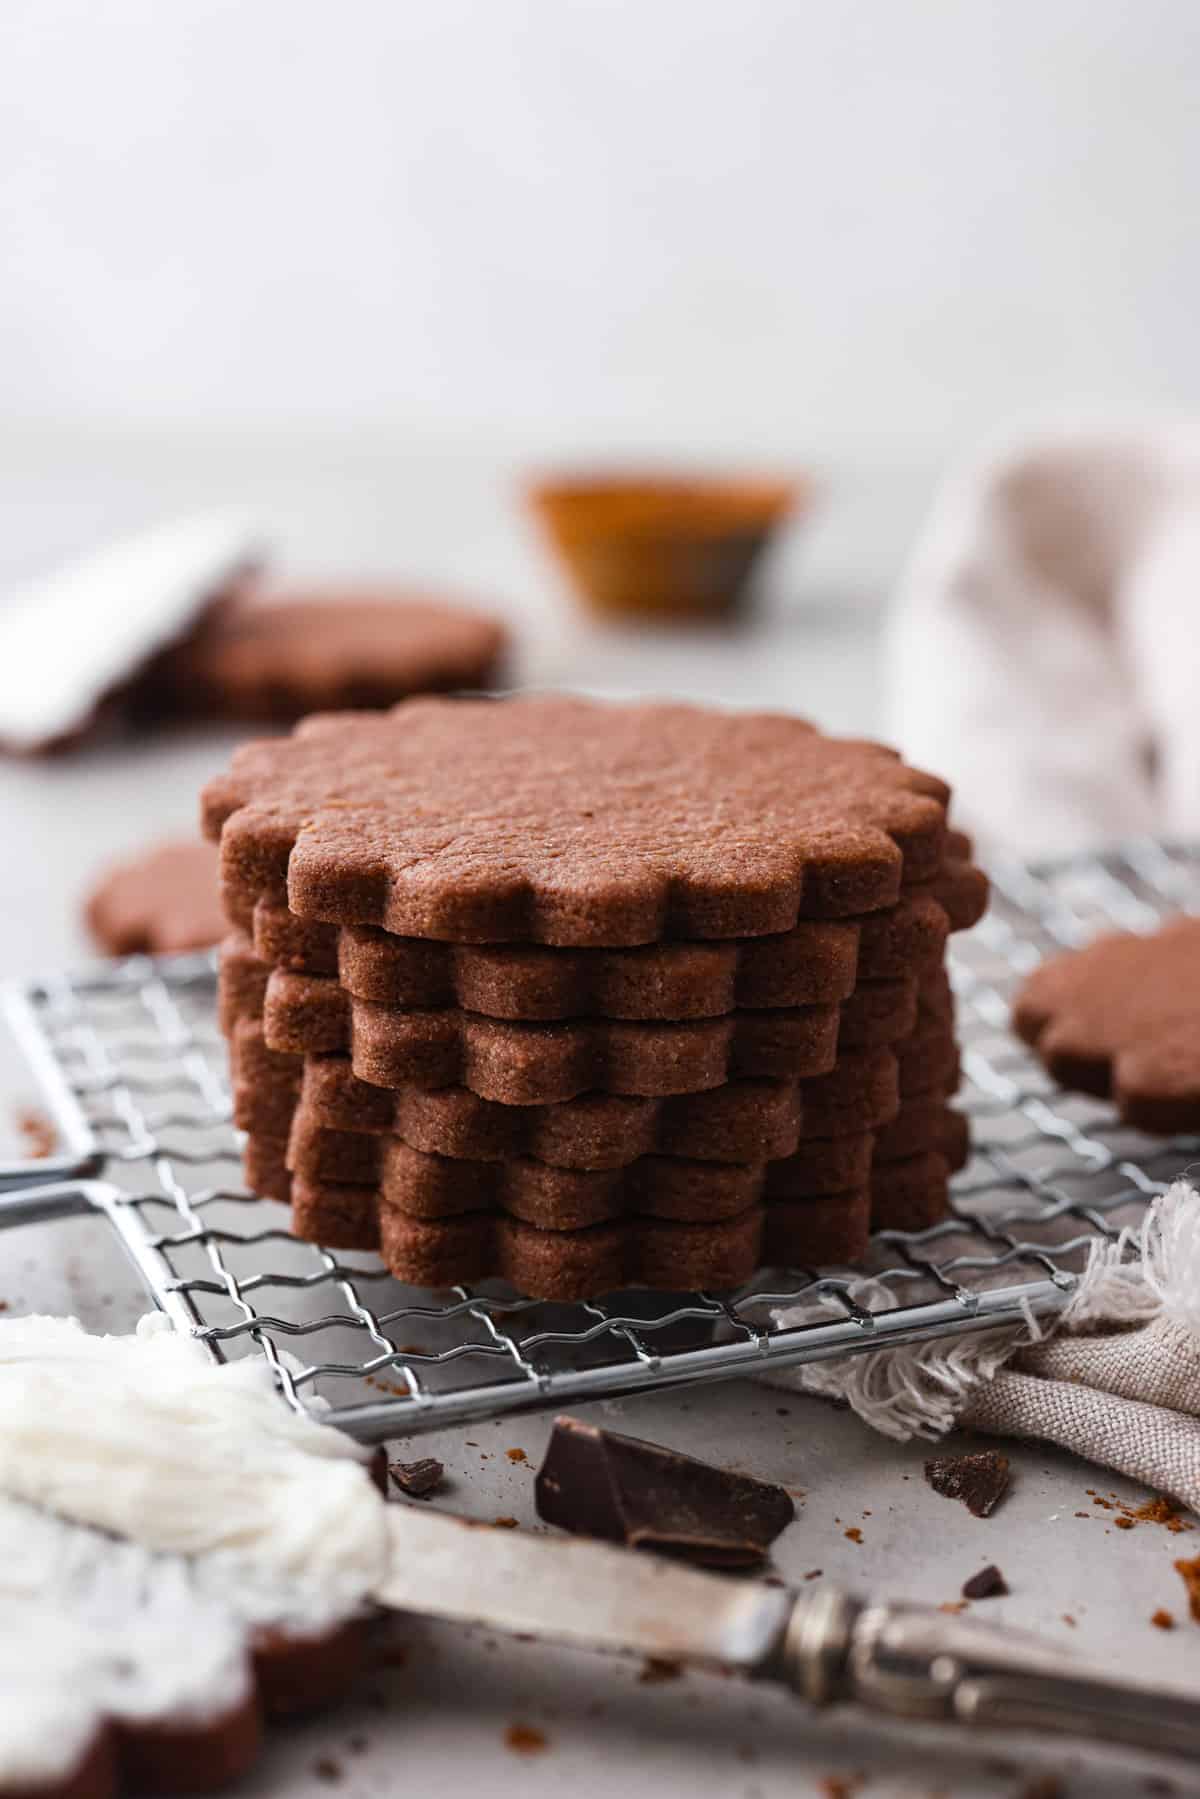 6 chocolate sugar cookies stacked on top of each other.